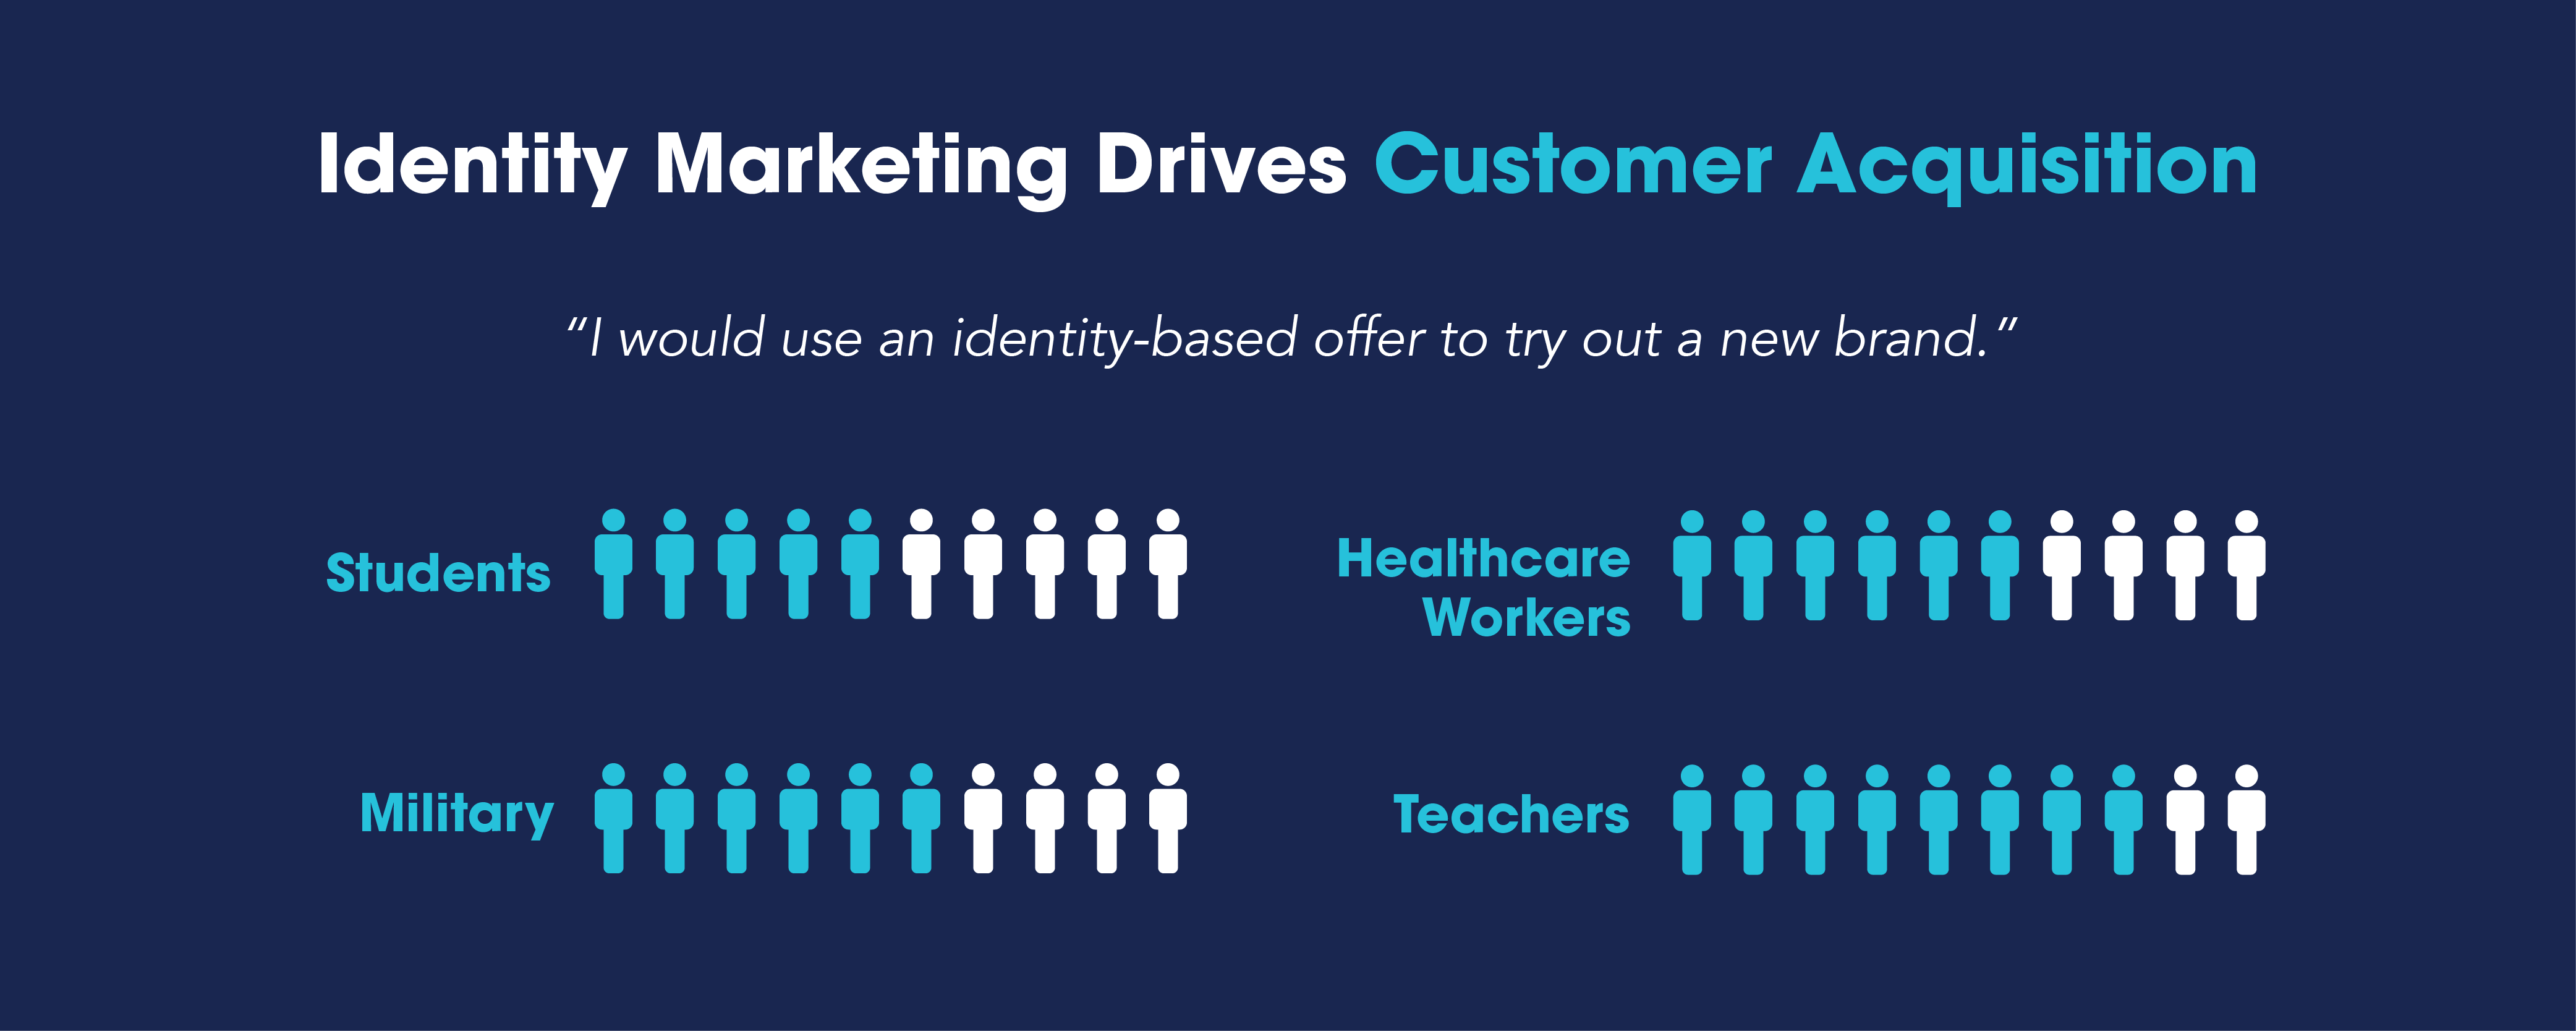 A graphic depiction of how many members of four consumer communities would use an identity-based offer to try a new brand: students - 5 in 10; healthcare workers - 6 in 10; the military - 6 in 10; teachers 8 in 10.